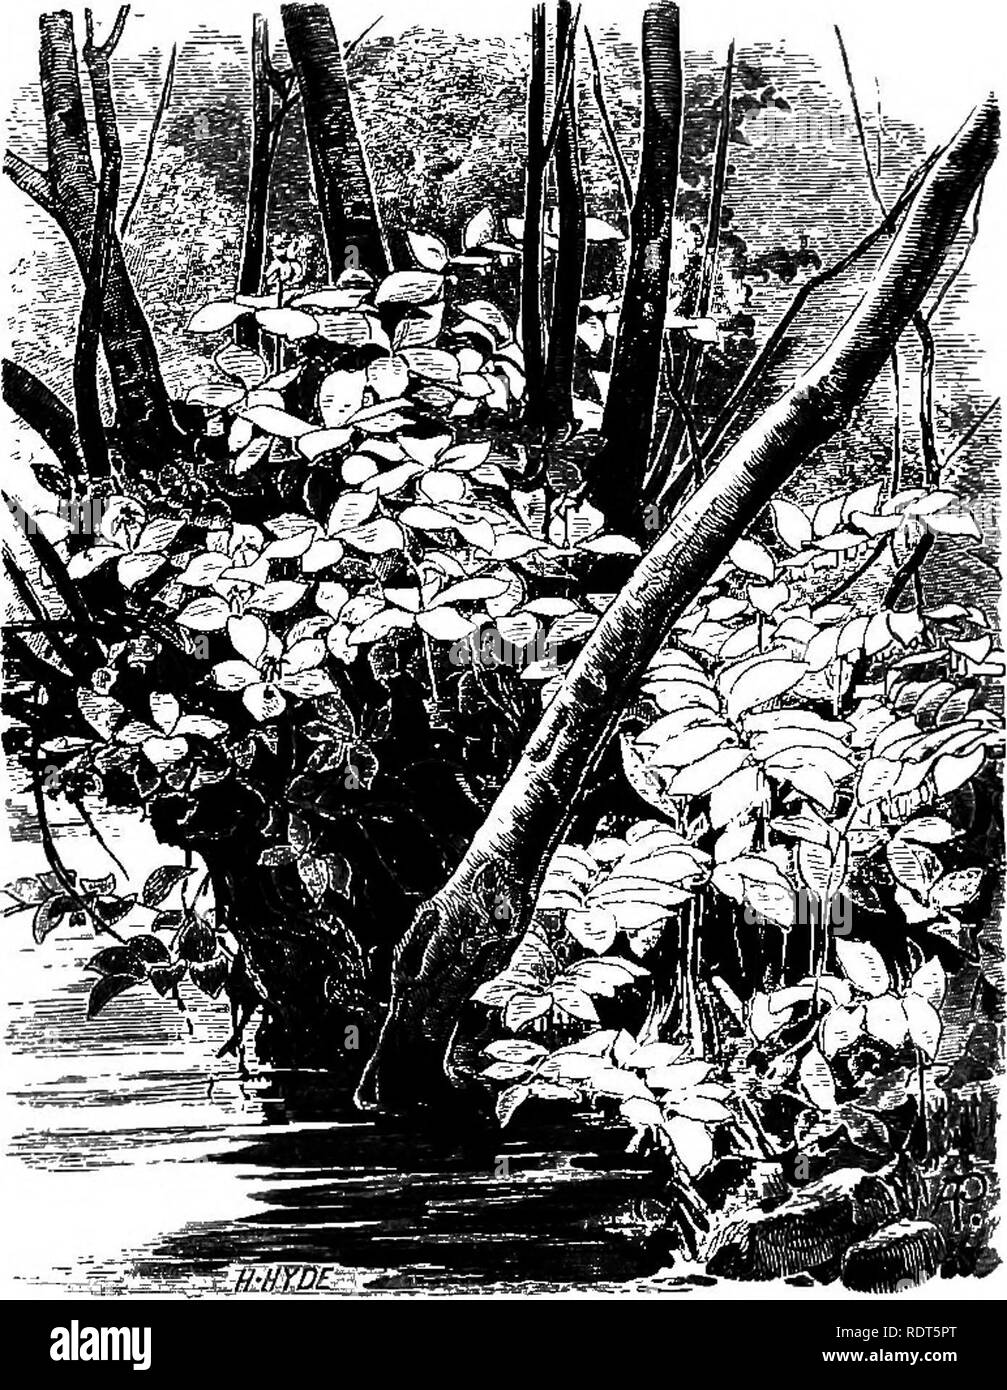 . The wild garden, or the naturalization and natural grouping of hardy exotic plants with a chapter on the garden of British wild flowers. Gardens; Wild flowers. CHAPTER X. THE BROOK-SIDE, WATER AND BOG GARDENS. In the water, at least, plants do not trou- ble us for attention. If we take the trouble to establish them the rest is easy, and there- fore those living near lake or stream may find much interest in adorning them with beautiful flower life of our own and other lands. The richness of our own. SOLOMON'S SEAL AND HERB PARIS, in copas by streamlet.. Please note that these images are extra Stock Photo